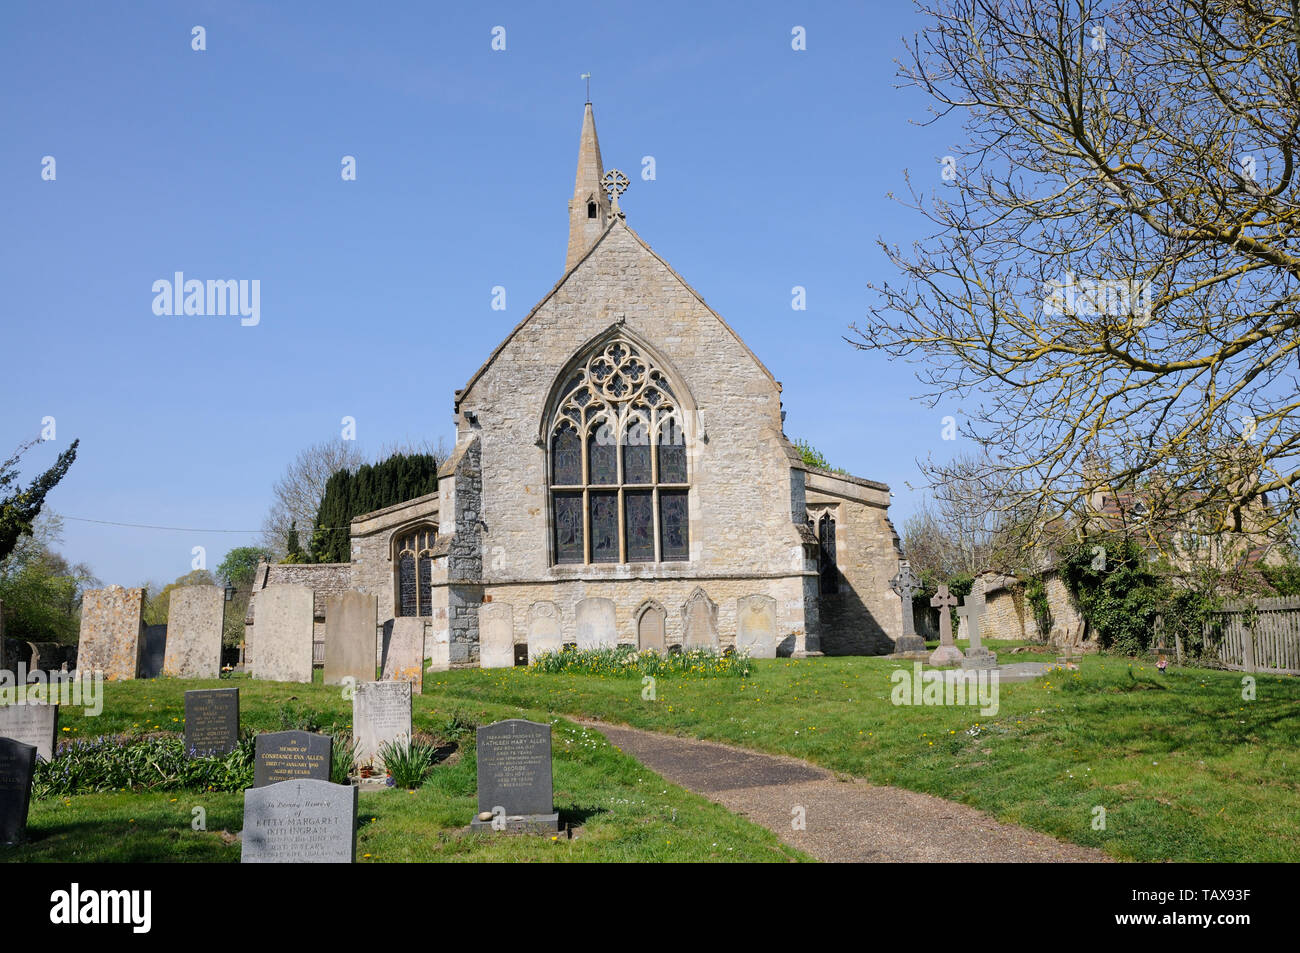 St James the Apostle Church, Grafton Underwood, Northamptonshire, contains a stained glass window which remembers men of the United States 8th Stock Photo